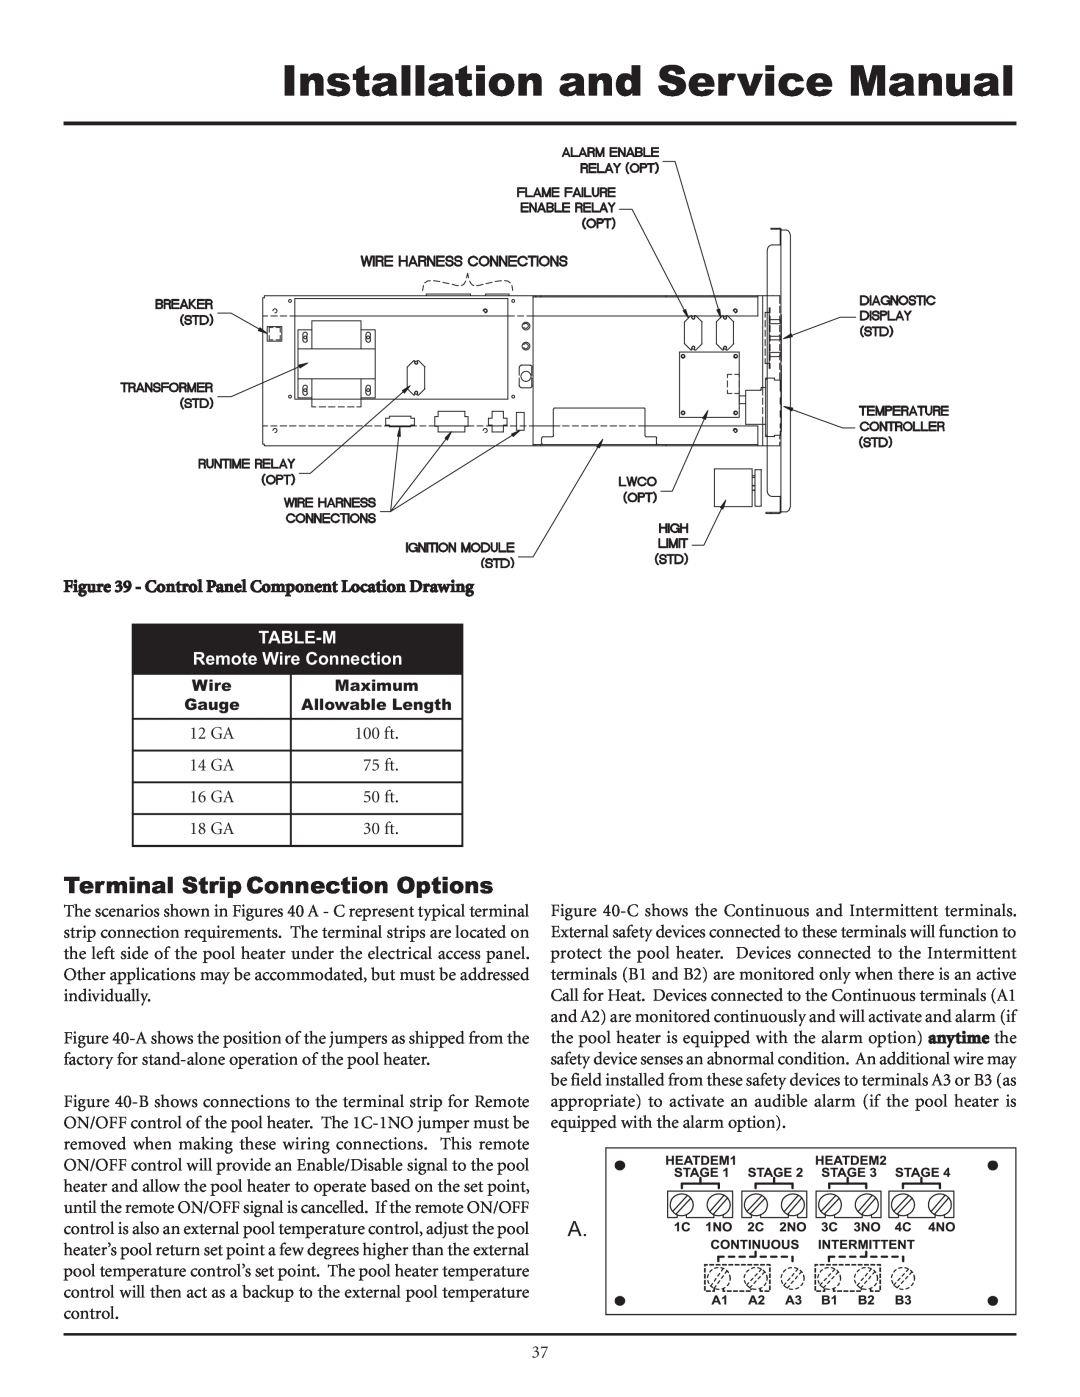 Lochinvar F0600187510 Terminal Strip Connection Options, TABLE-M Remote Wire Connection, Installation and Service Manual 